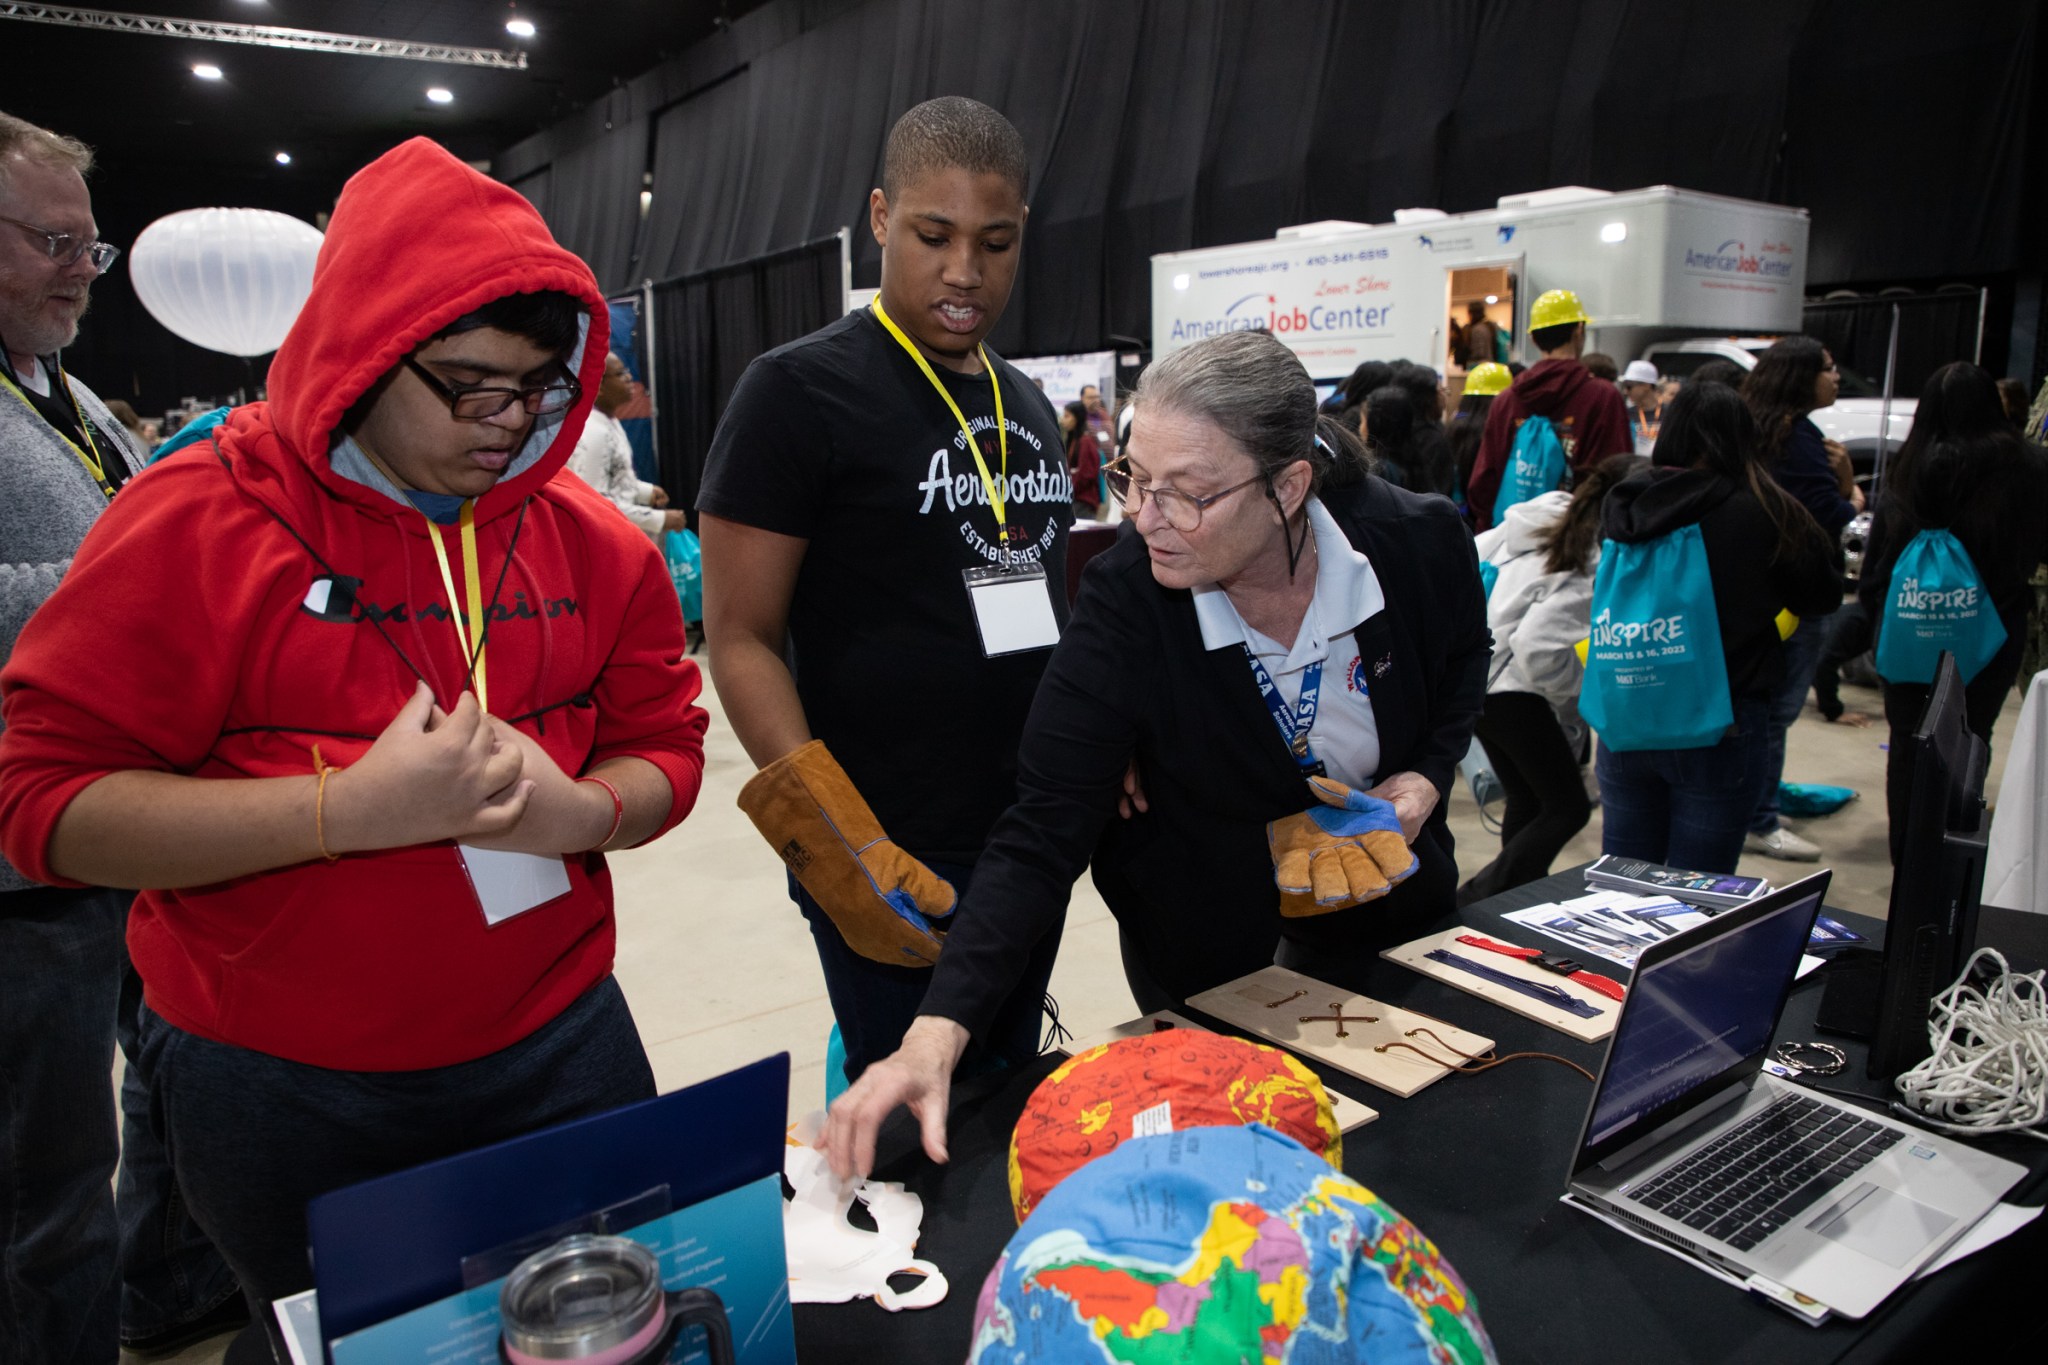 A woman points at educational materials set out on a table while two students look down at the table. Behind them are other booths at a convention center.